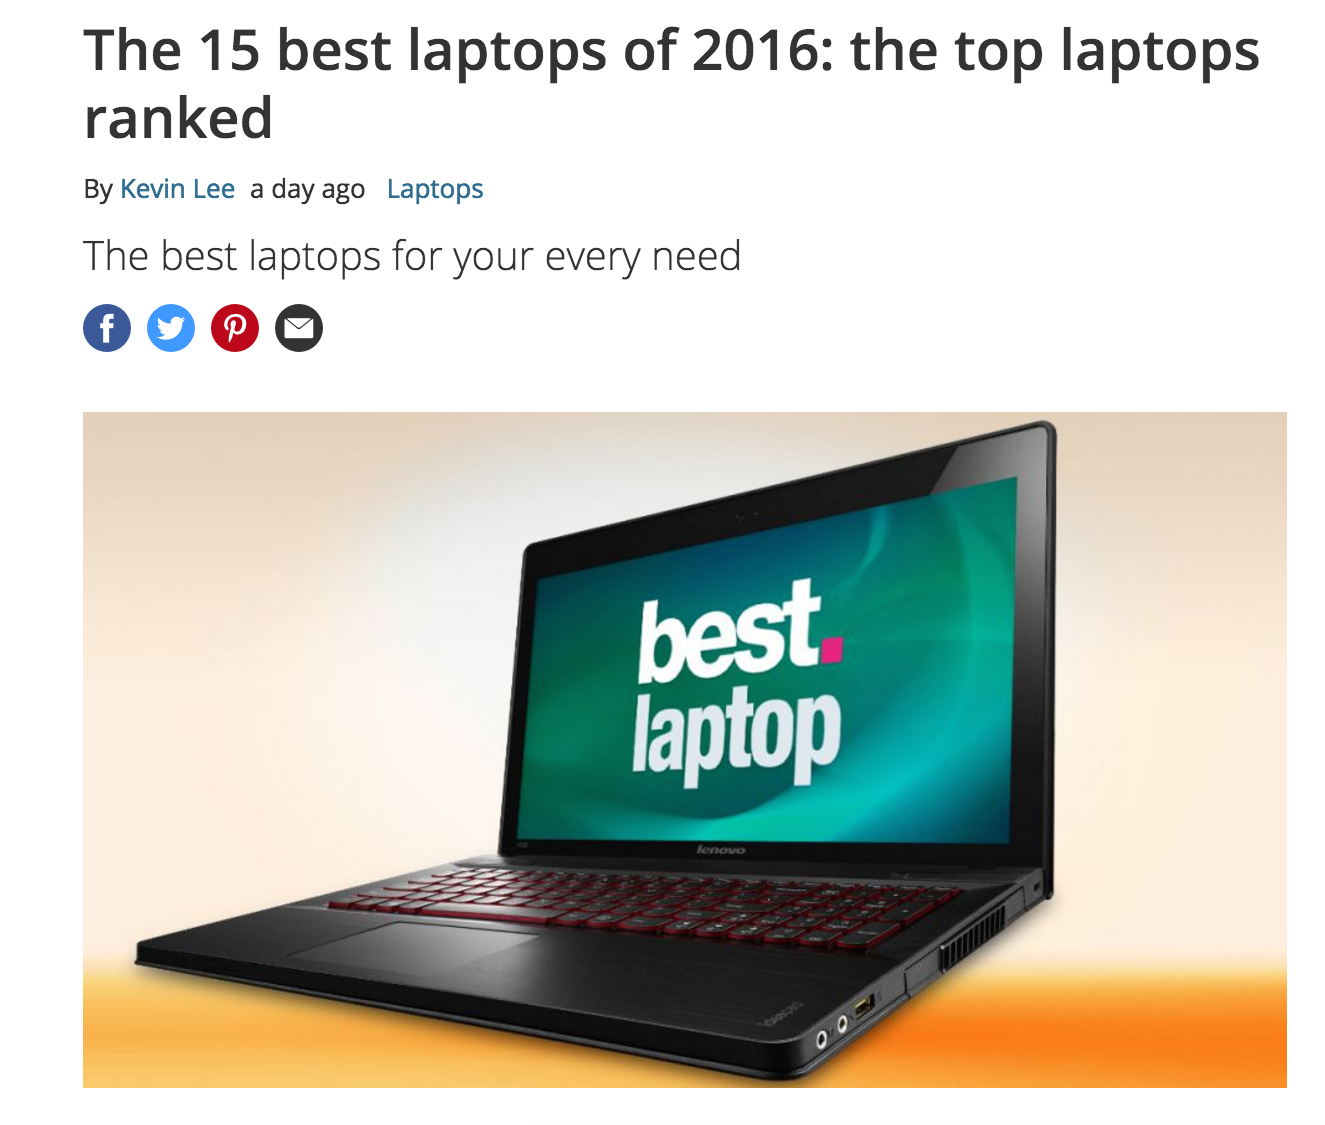 The 15 best laptops of 2016: the top laptops ranked blog post by Kevin Lee image